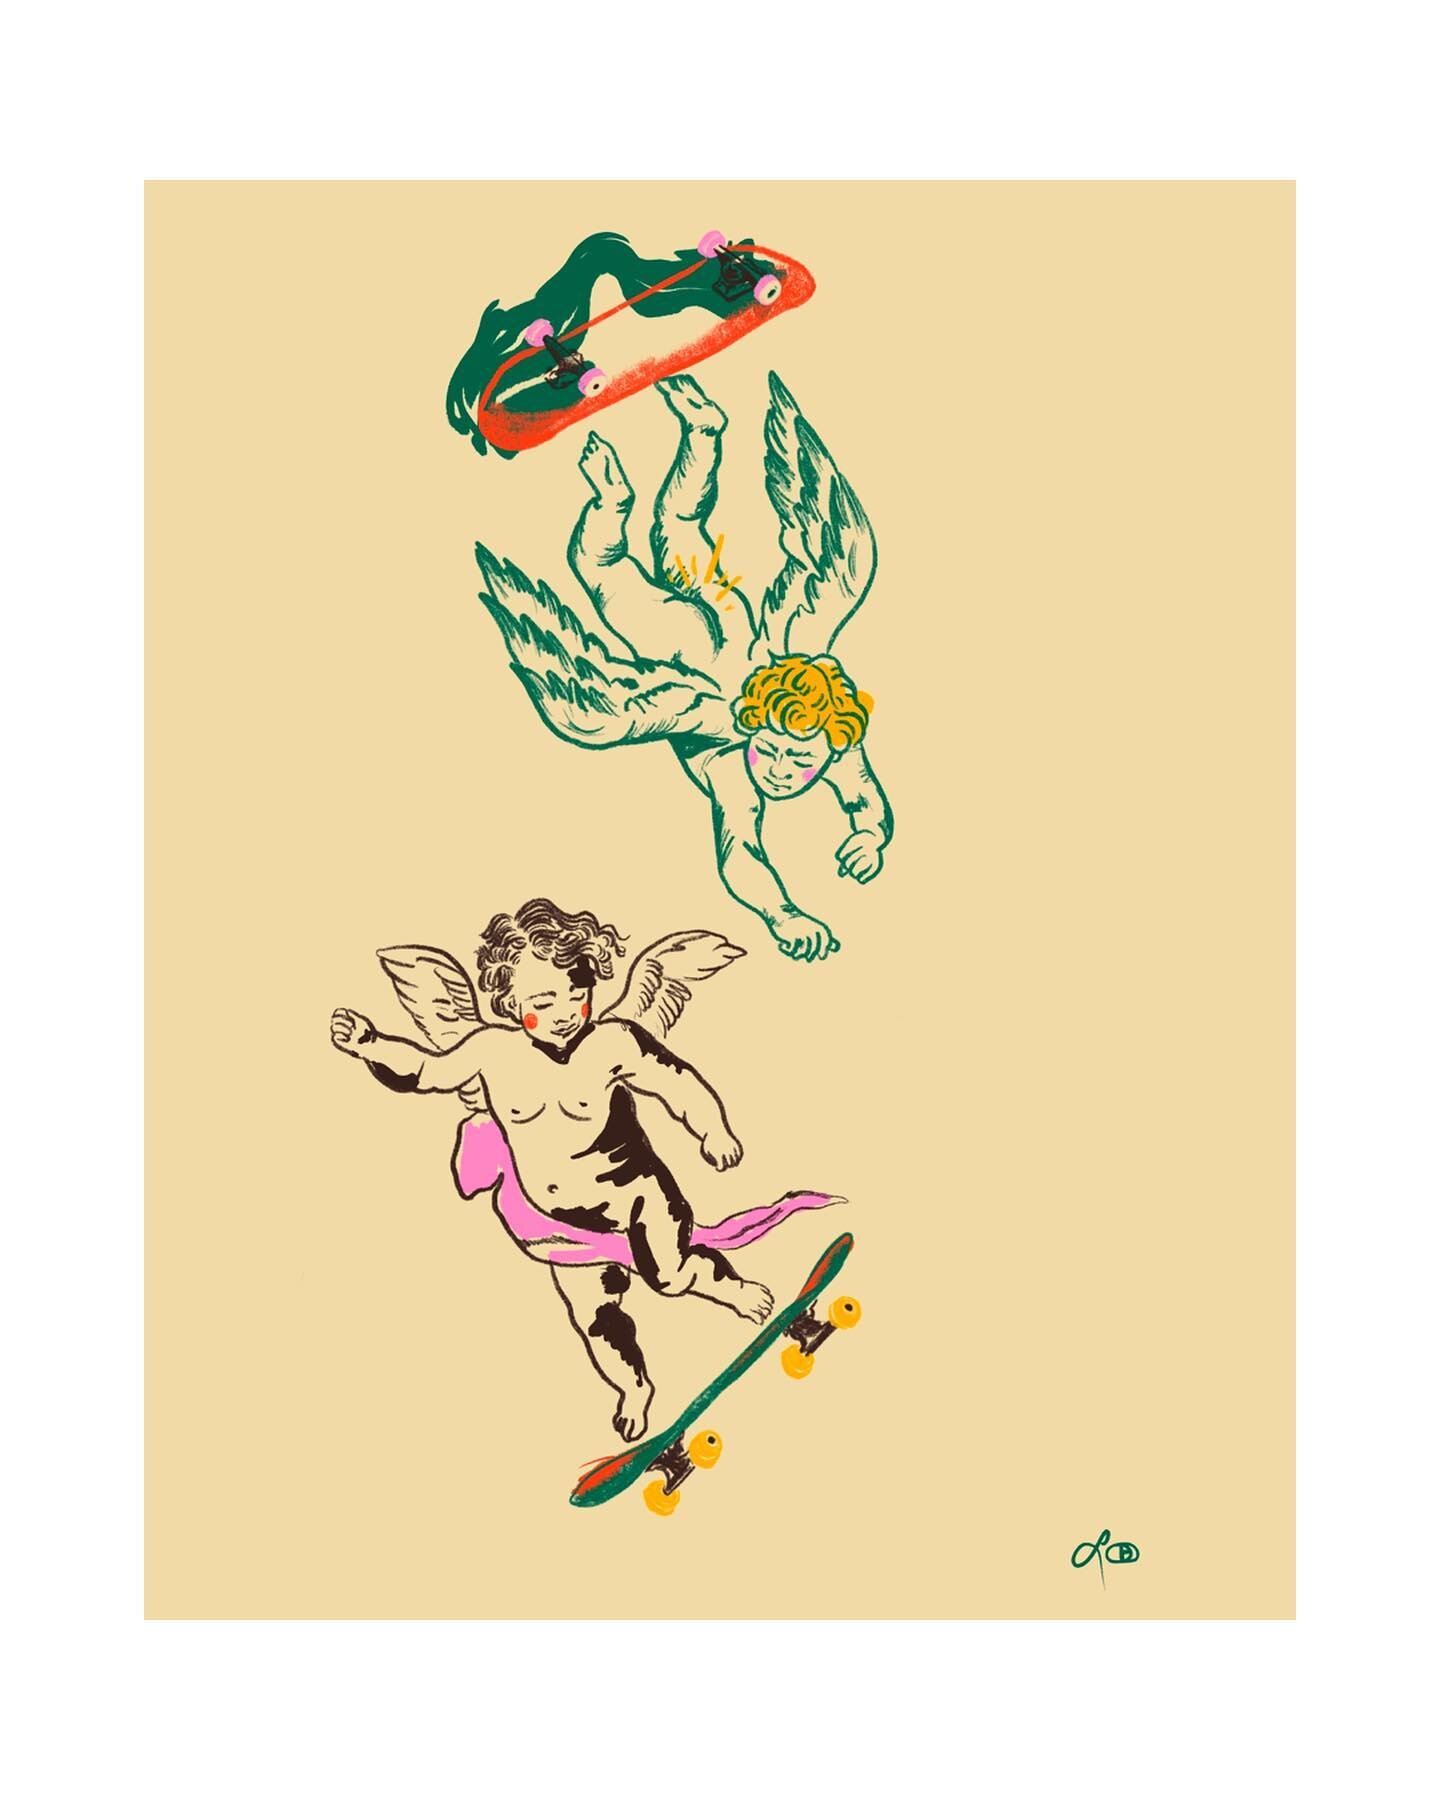 BEHIND THE CURTAIN: how pieces become who they are | everyone&rsquo;s favorite sold out print, our skateboarding angels started off as an idea and a color palette thrust upon me after waking in the middle of the night, as they often do. 

swipe to se